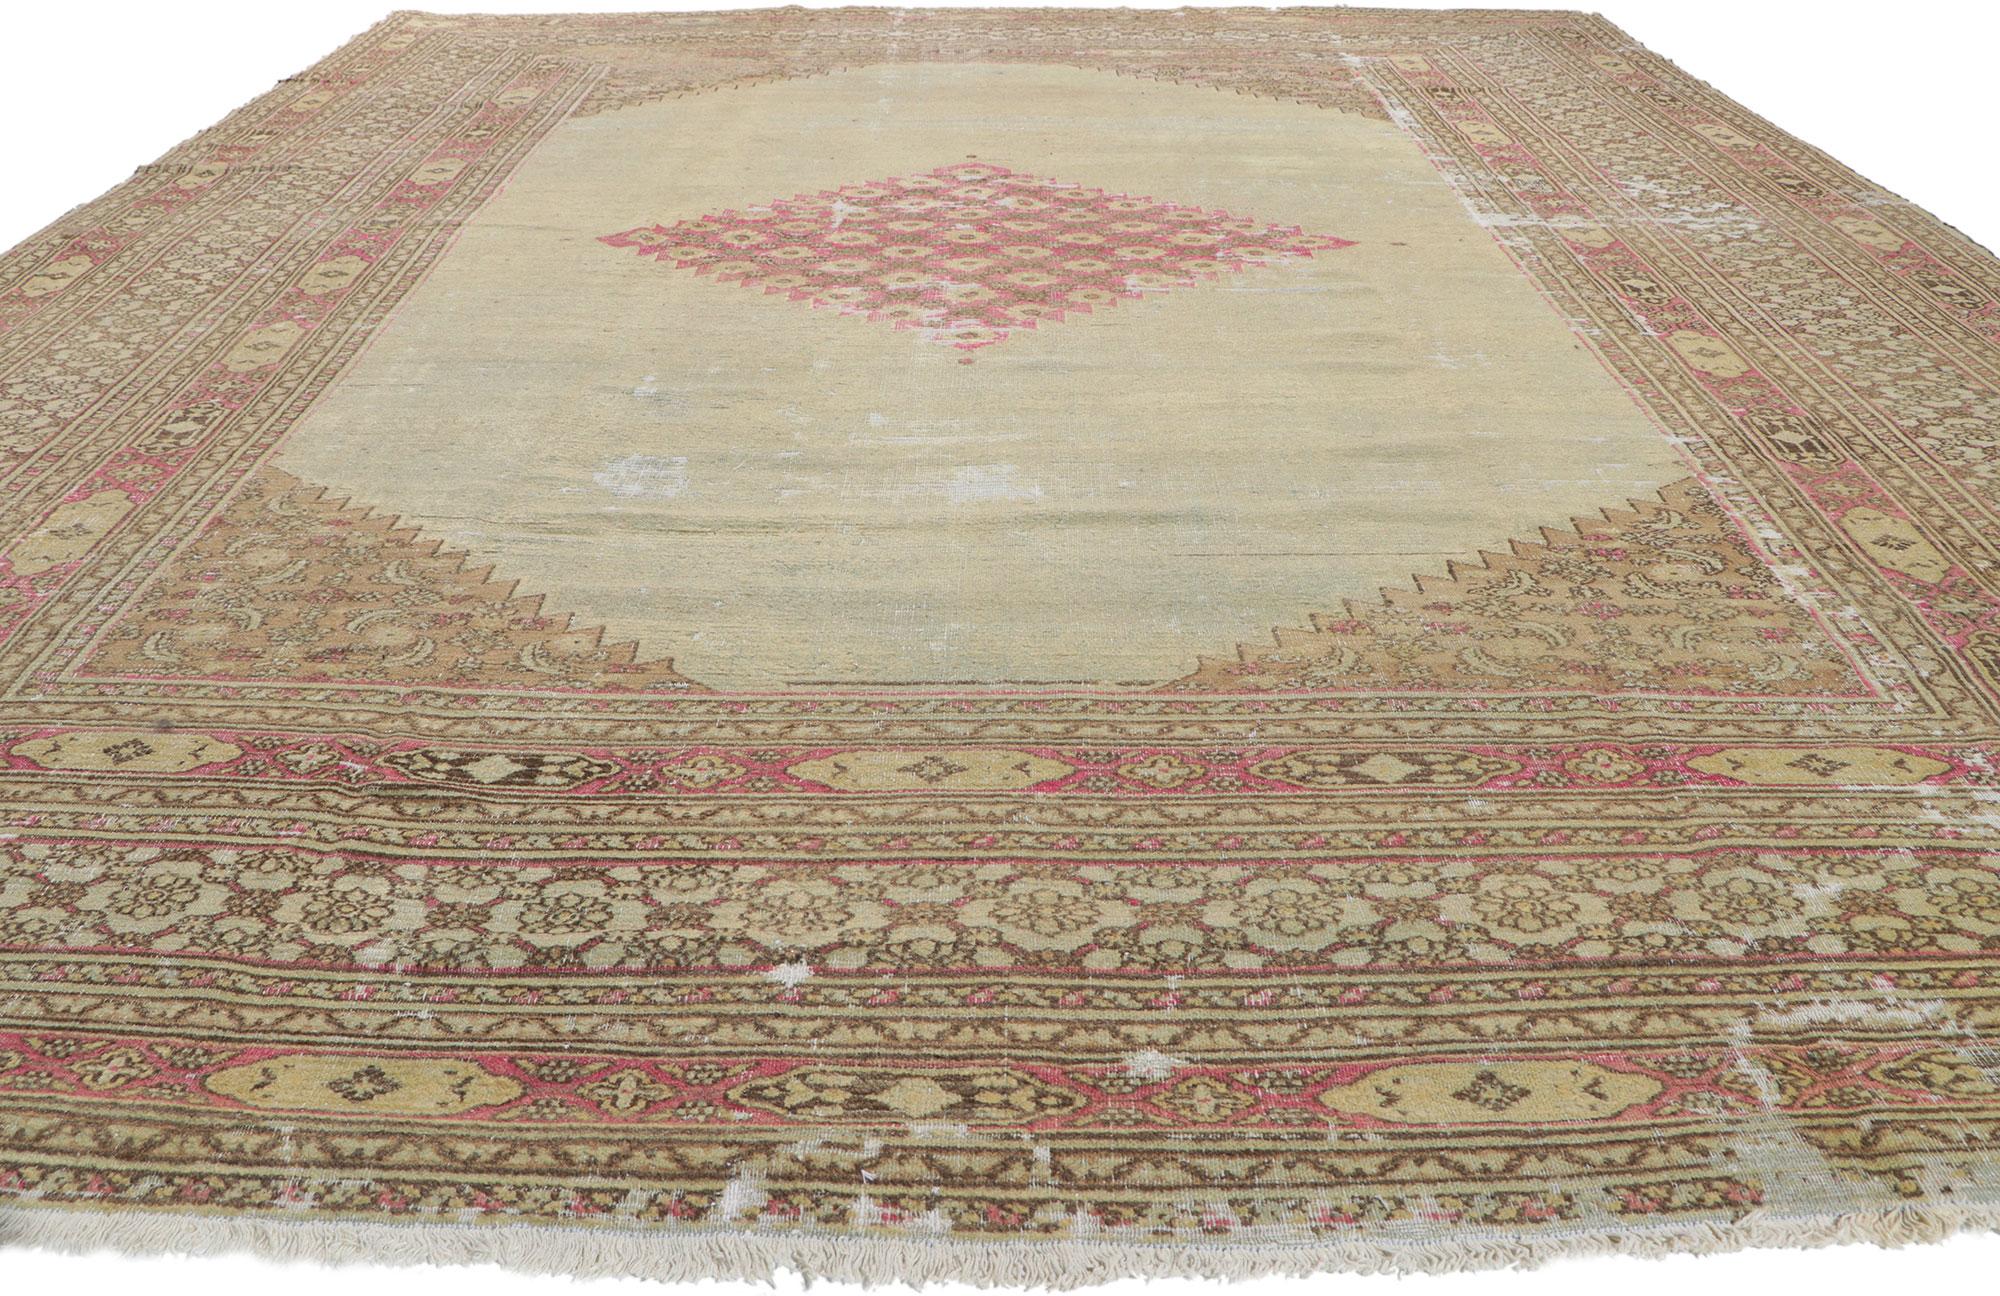 Late 19th Century Antique Persian Khorassan Rug with English Manor Style In Distressed Condition For Sale In Dallas, TX